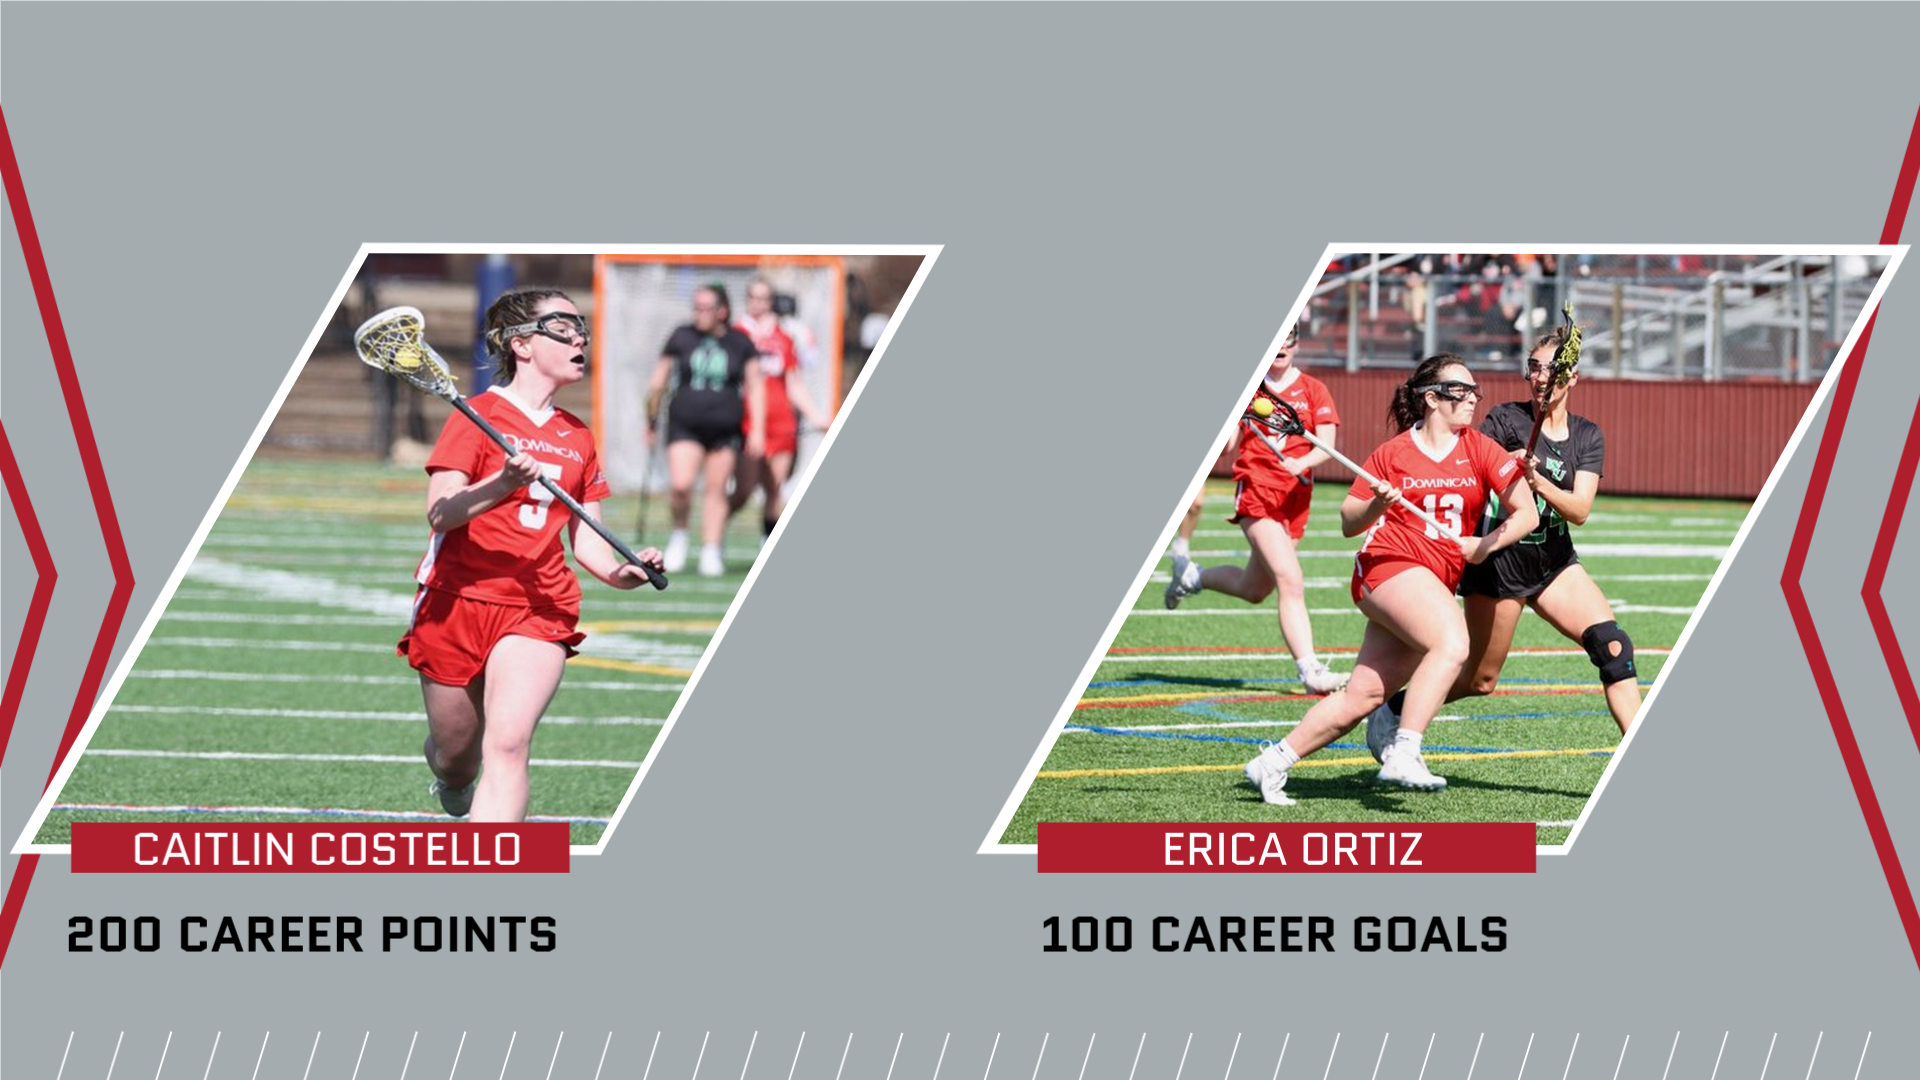 COSTELLO RECORDS 200TH CAREER POINT AND ORTIZ SCORES 100TH CAREER GOAL IN REGULAR SEASON FINALE